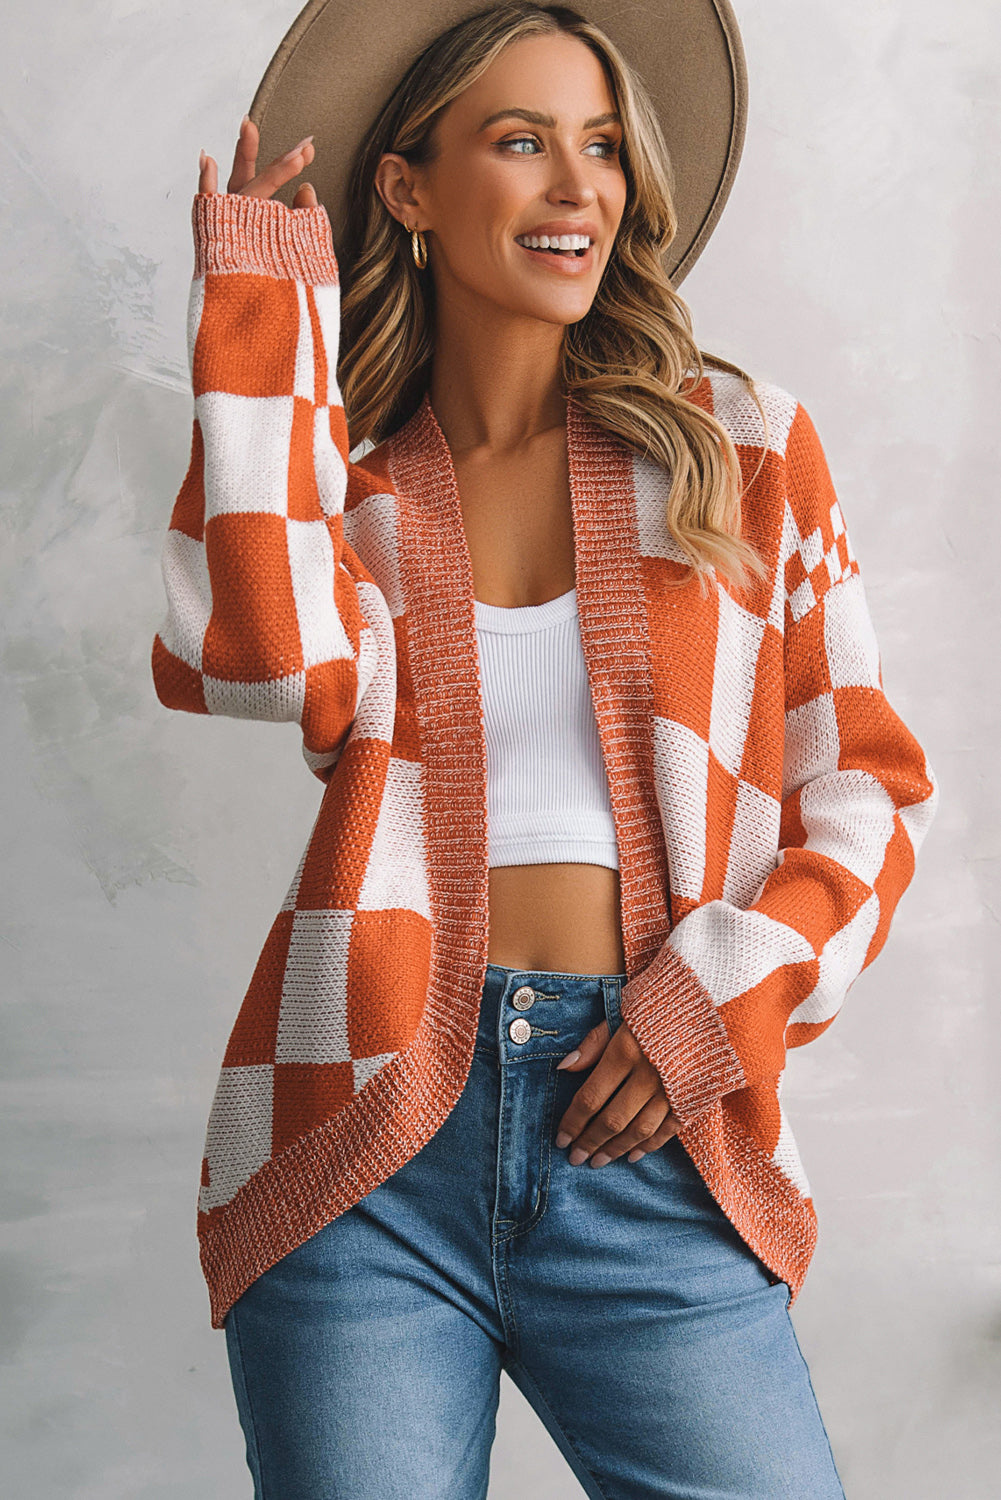 Cardigan Plaid Checkered Open Front Dropped Shoulder Sweater KESLEY